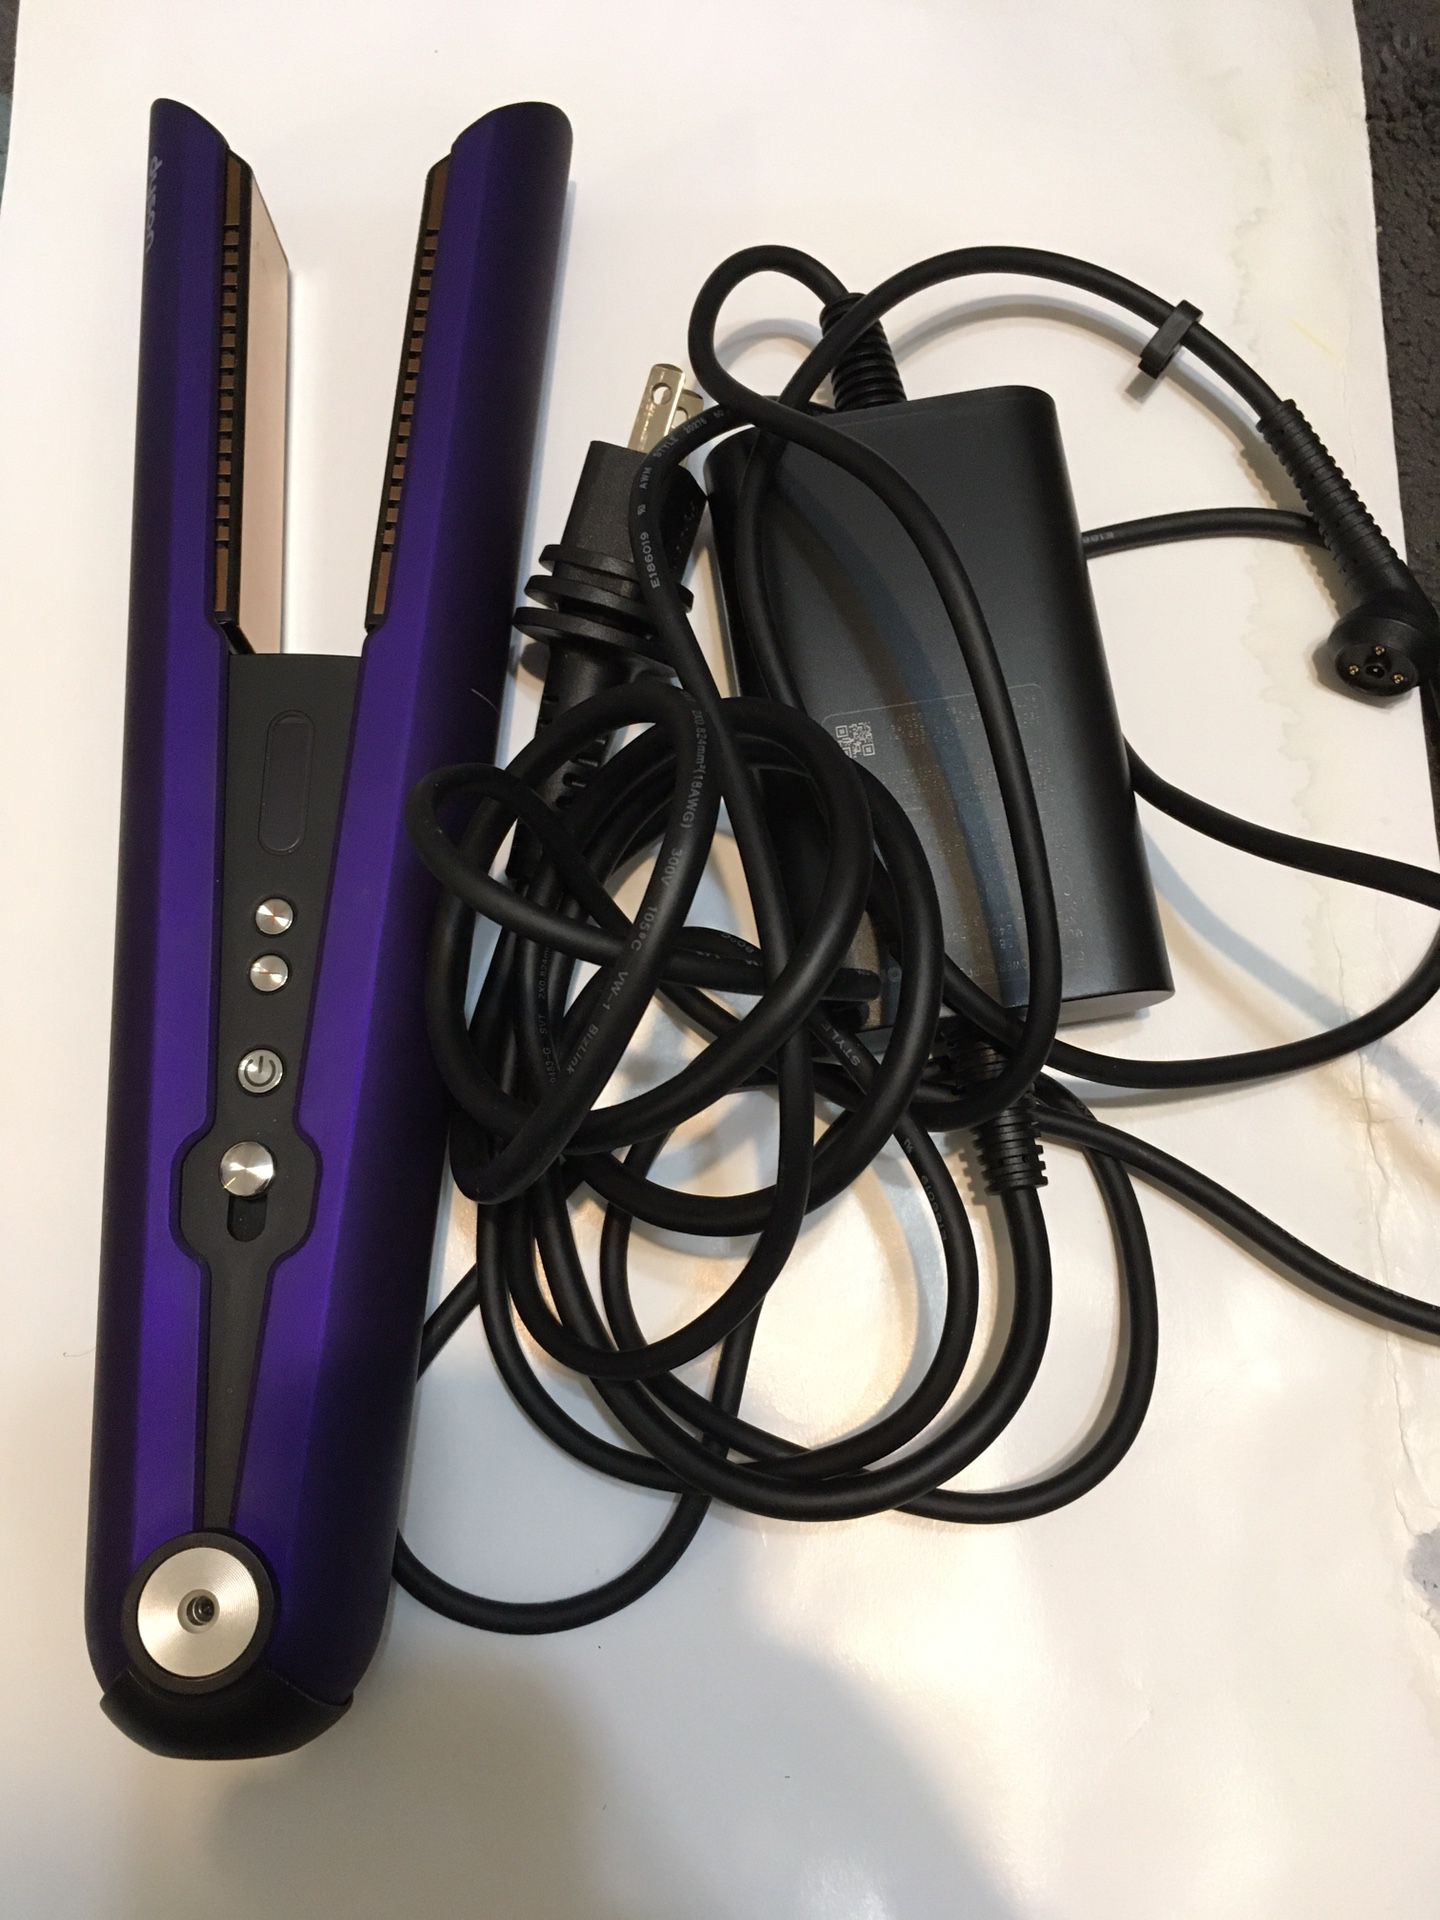 Dyson Corrale Hair Straightener - HS03 purple/Black   In good working condition   Comes with charger 